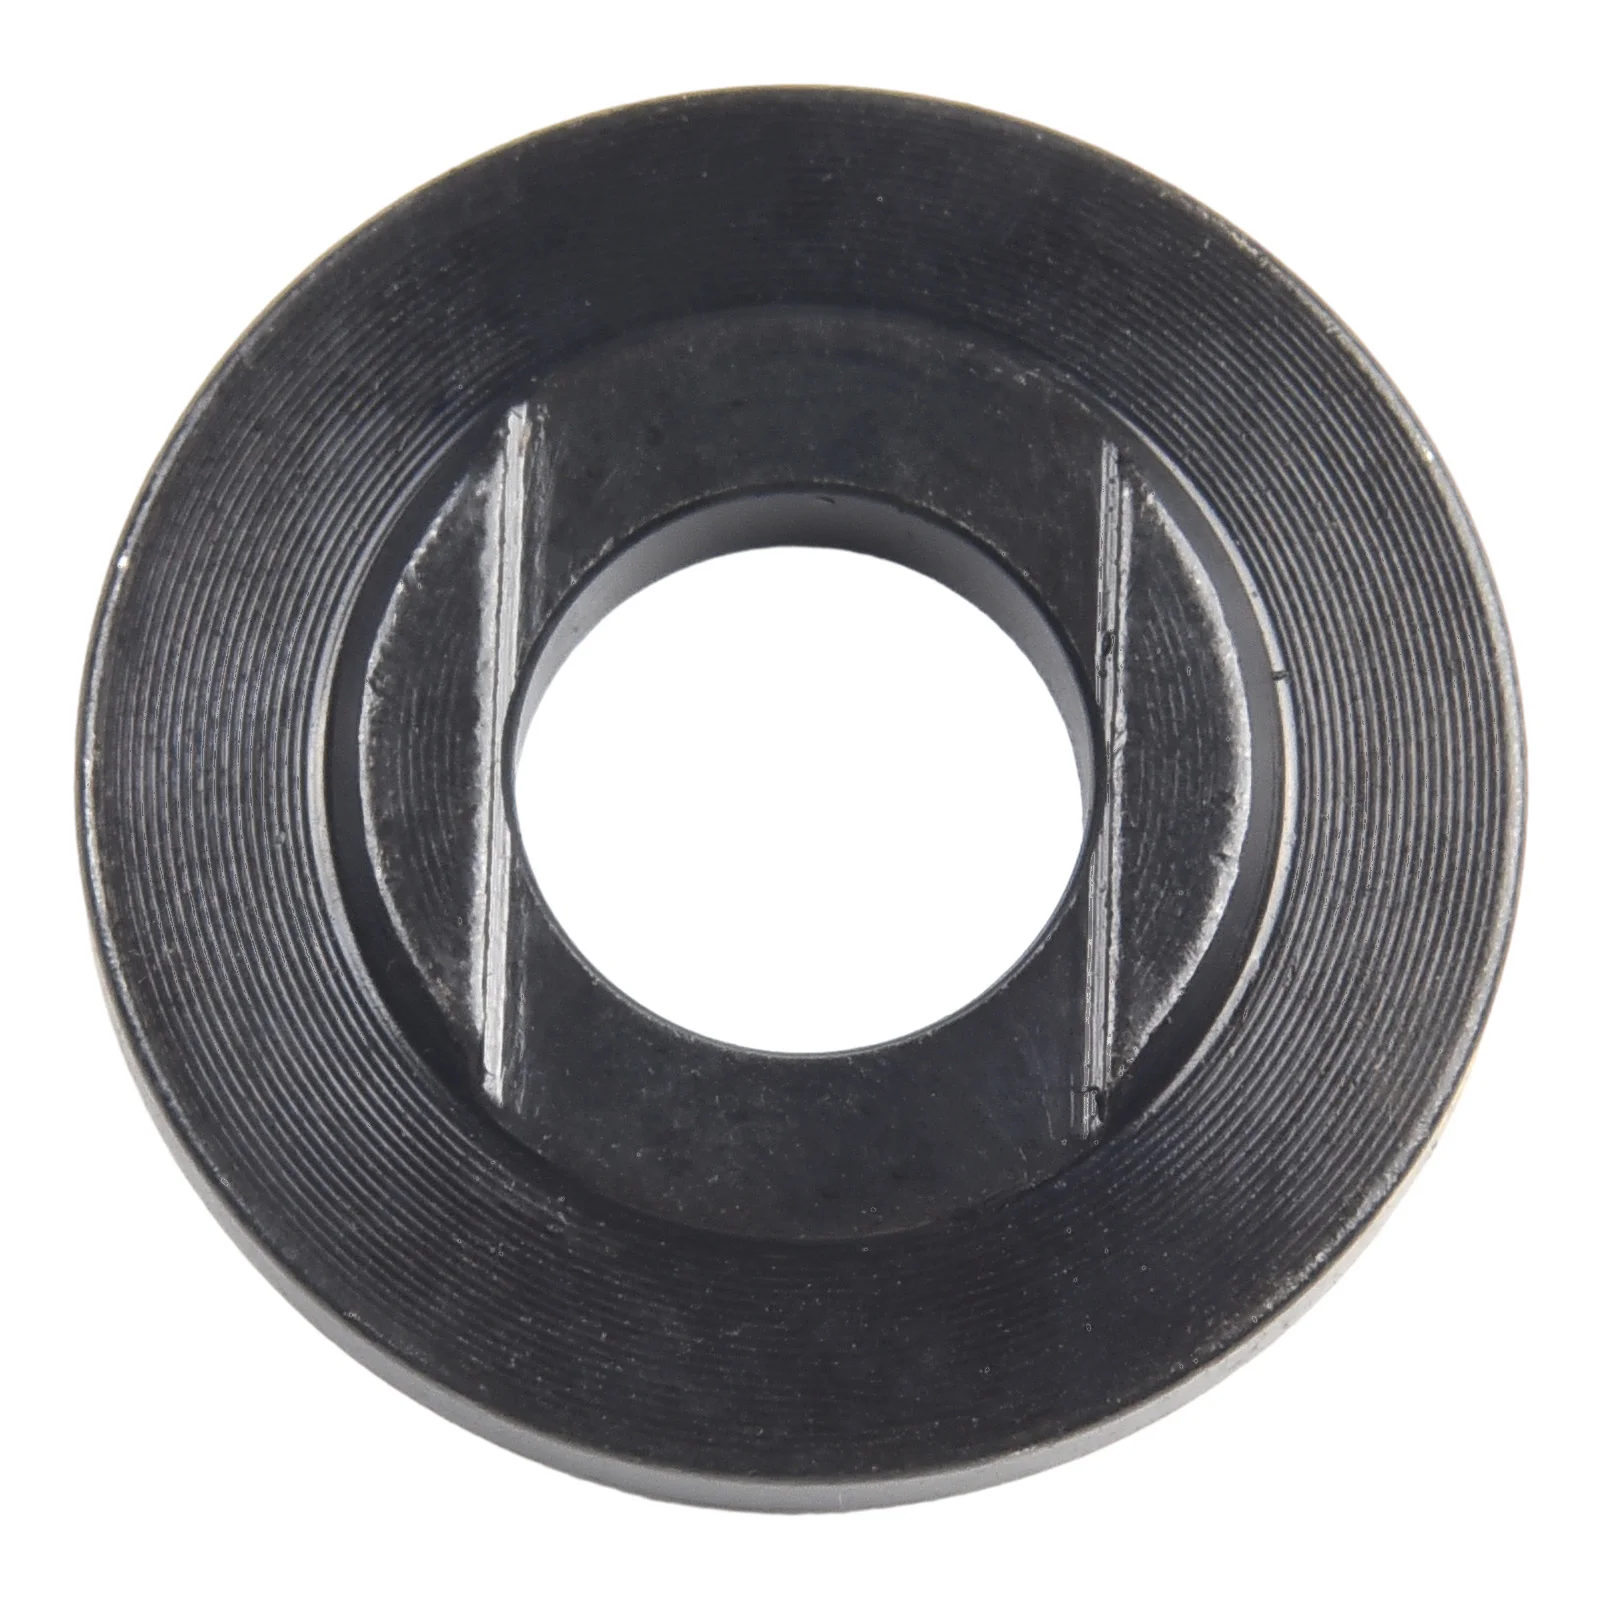 

M14 Thread Replacement Angle Grinder Inner Outer Flange Nut Set Tools 150 Pressure Plate Style Fixture Angle Grinder Accessories